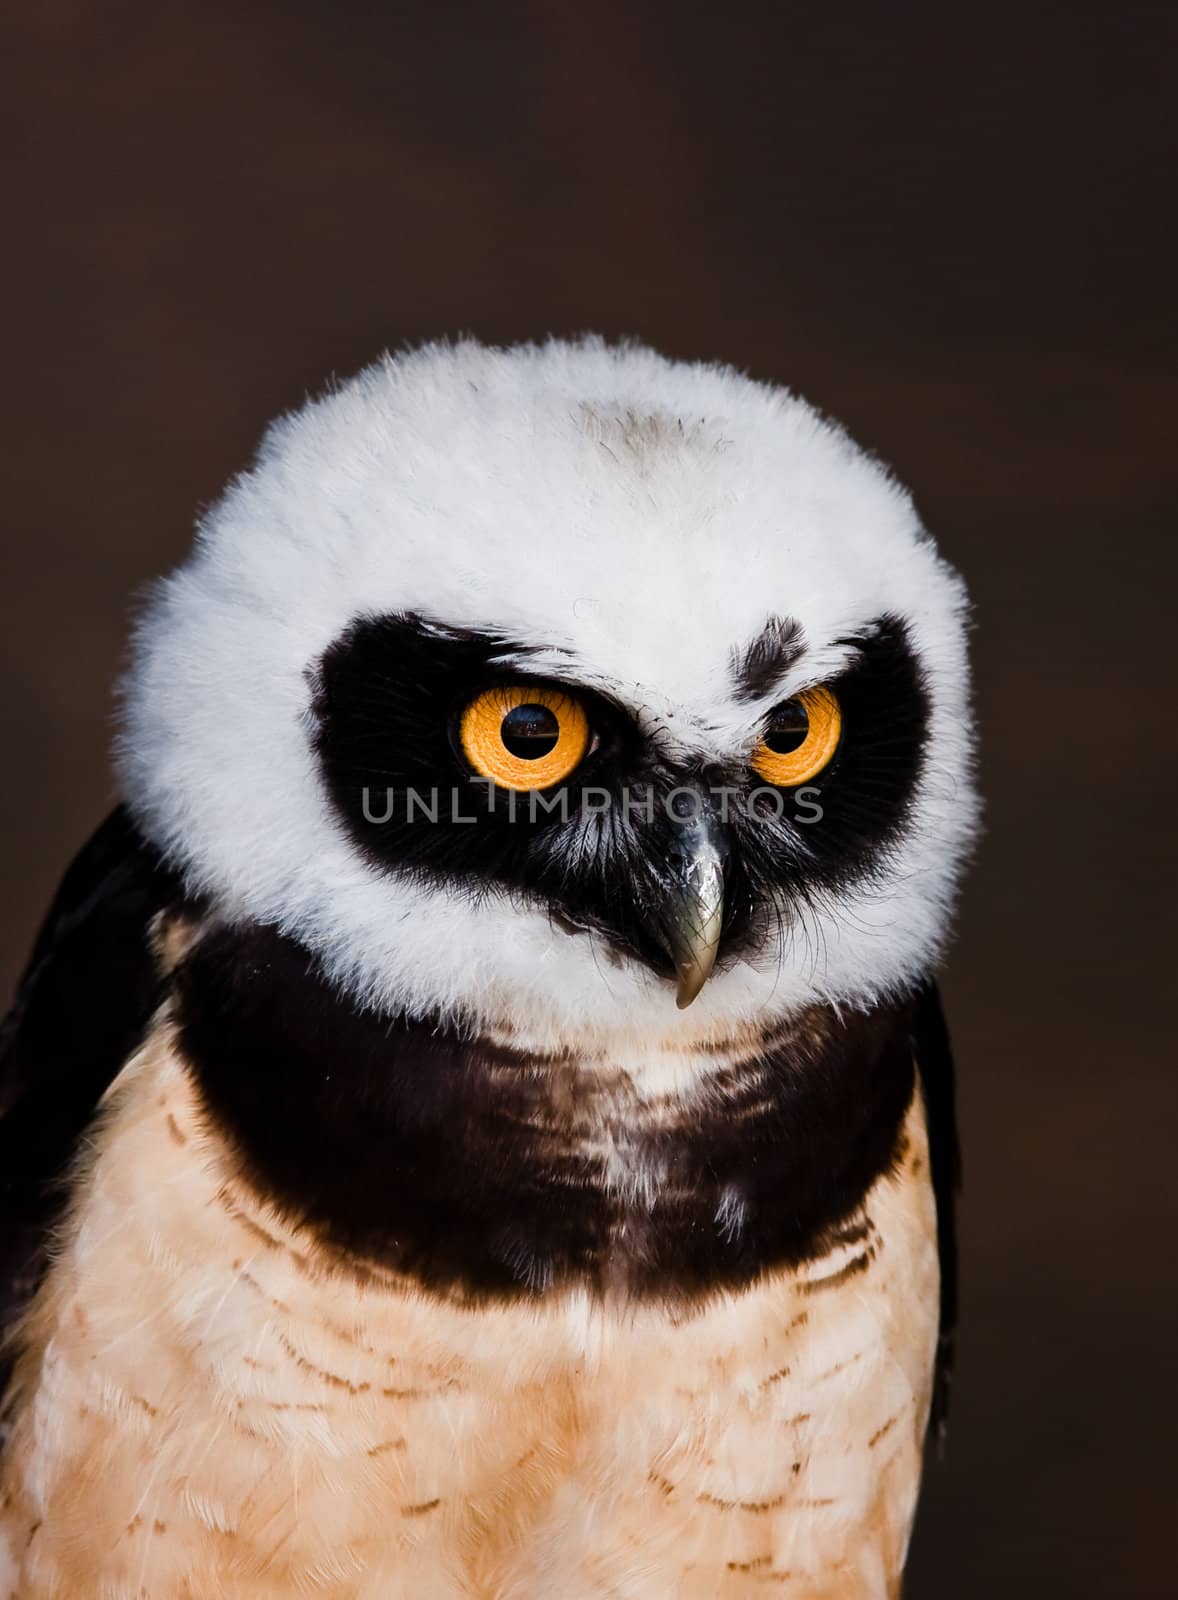 spectacled owl by trgowanlock